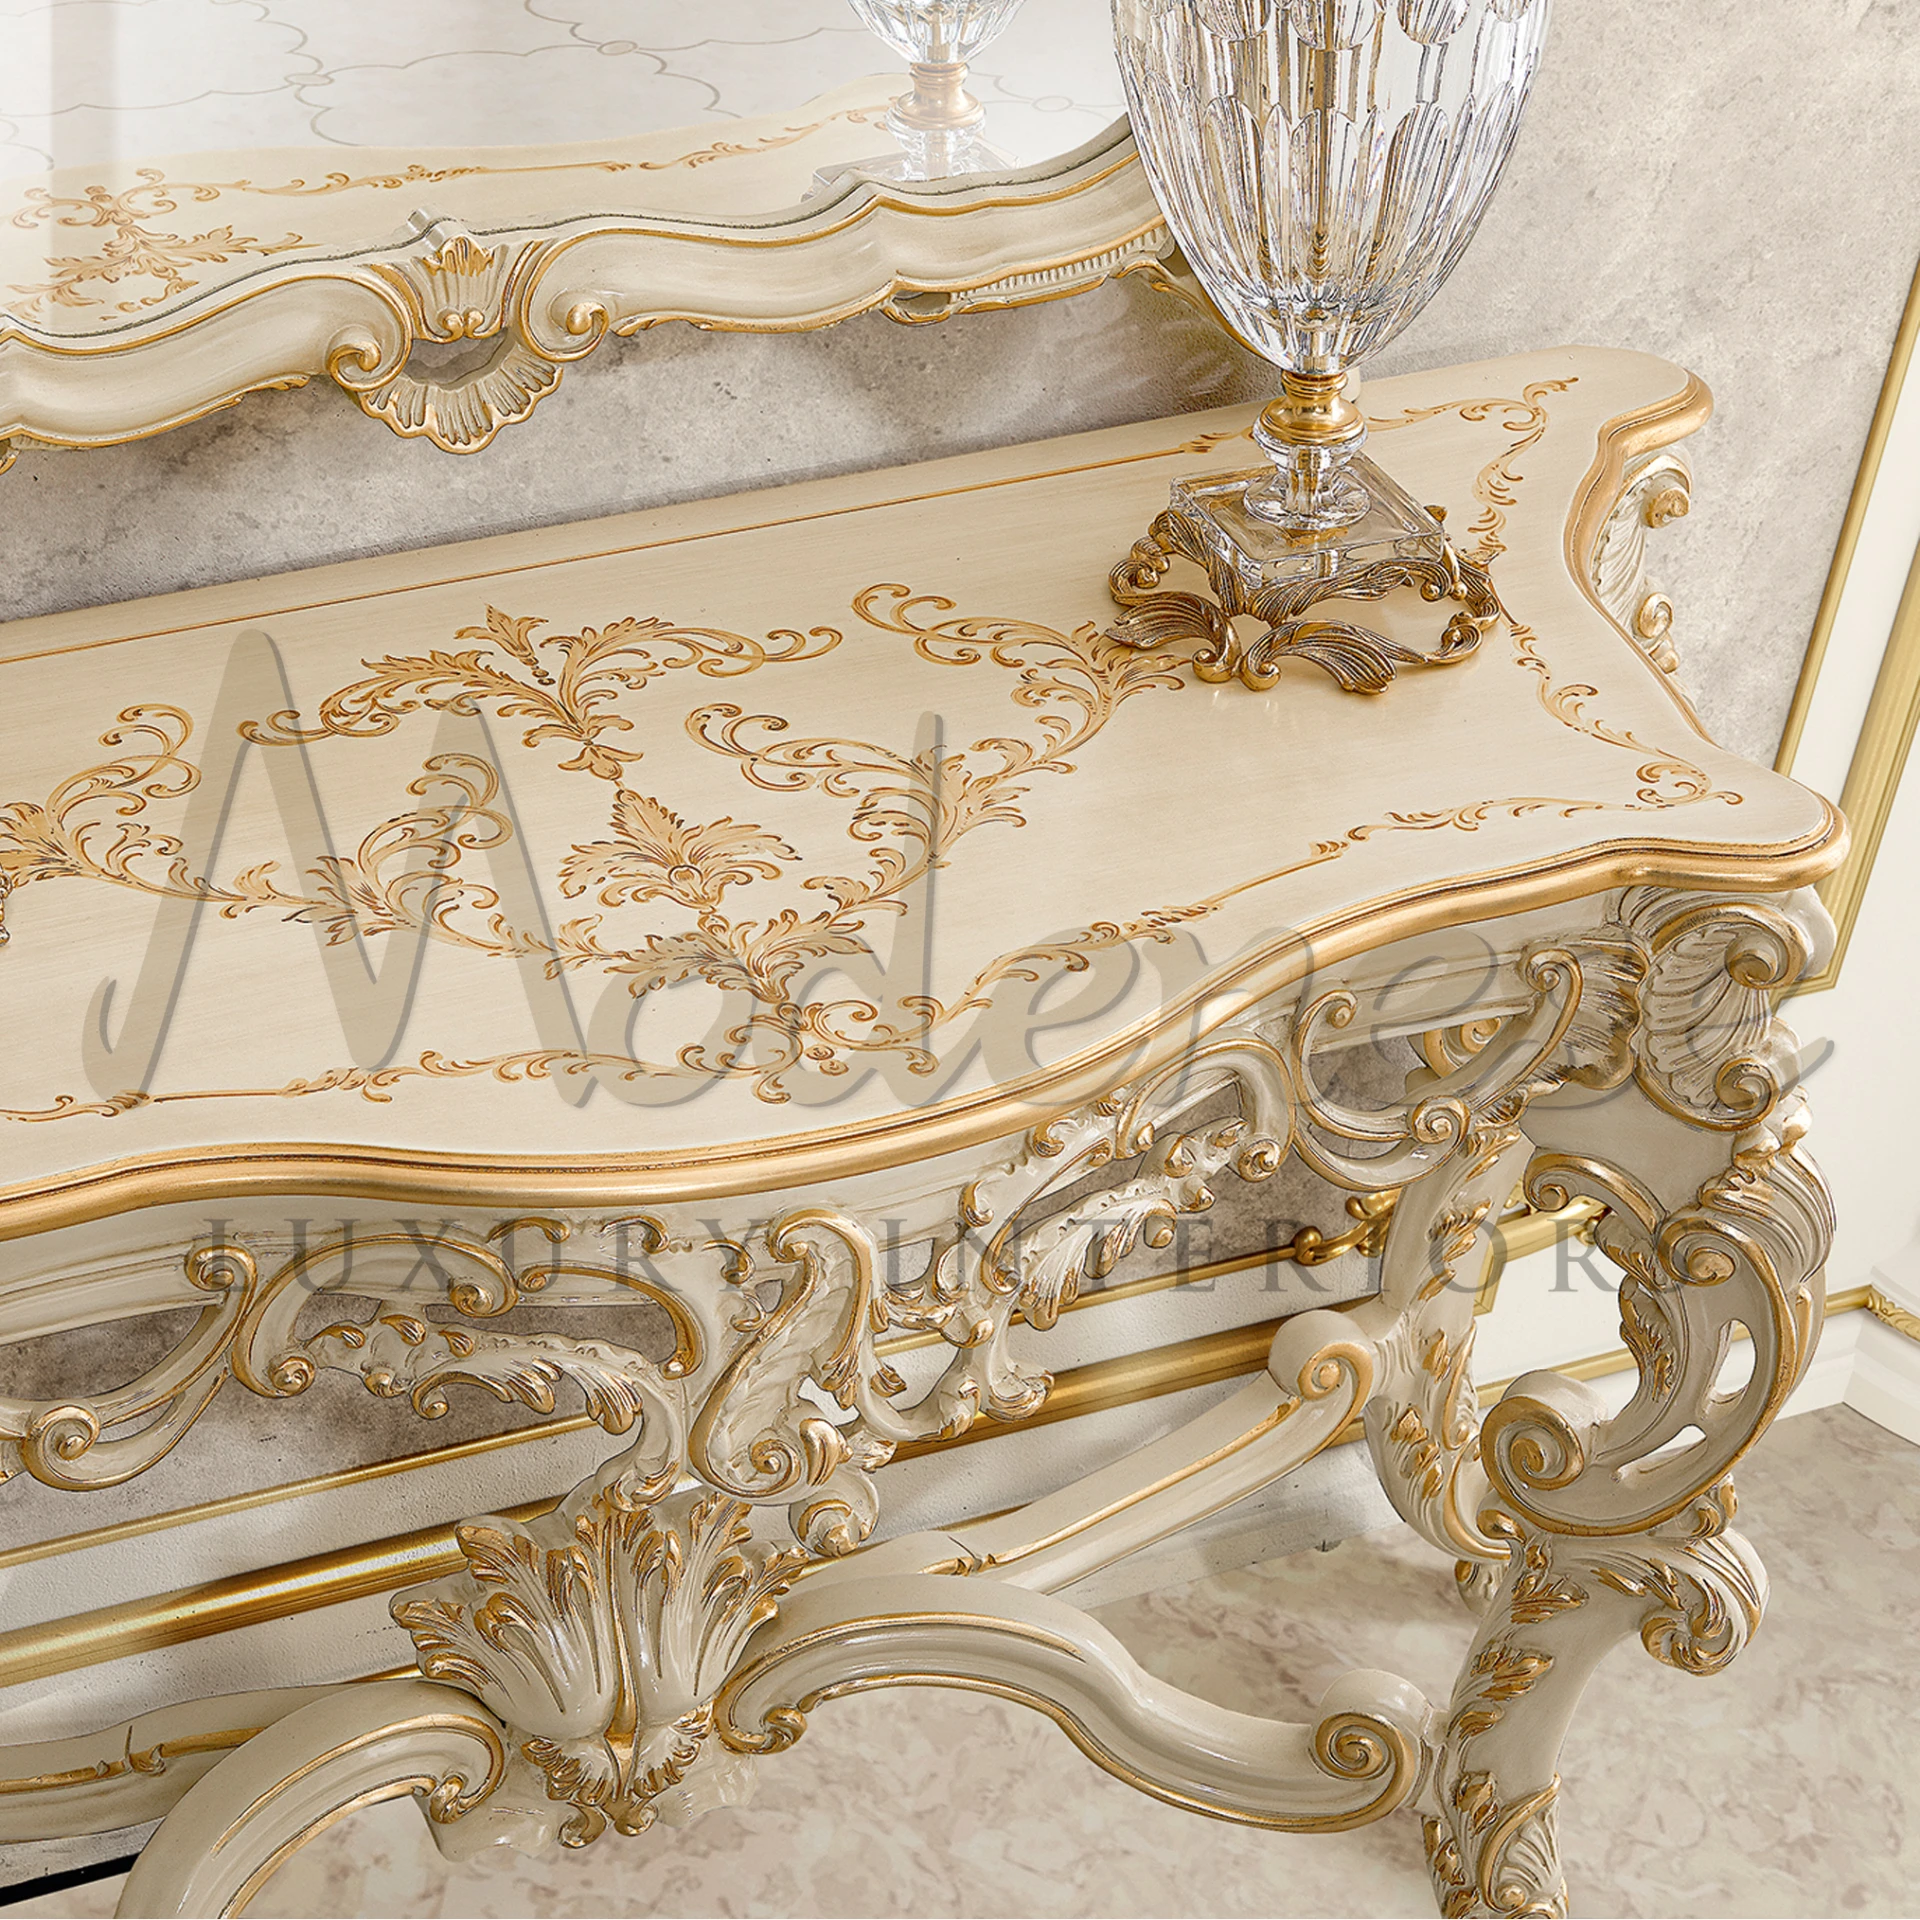 Stunning Solid Wood Baroque Rectangular Console, a symbol of luxury and craftsmanship by Modenese Interiors.